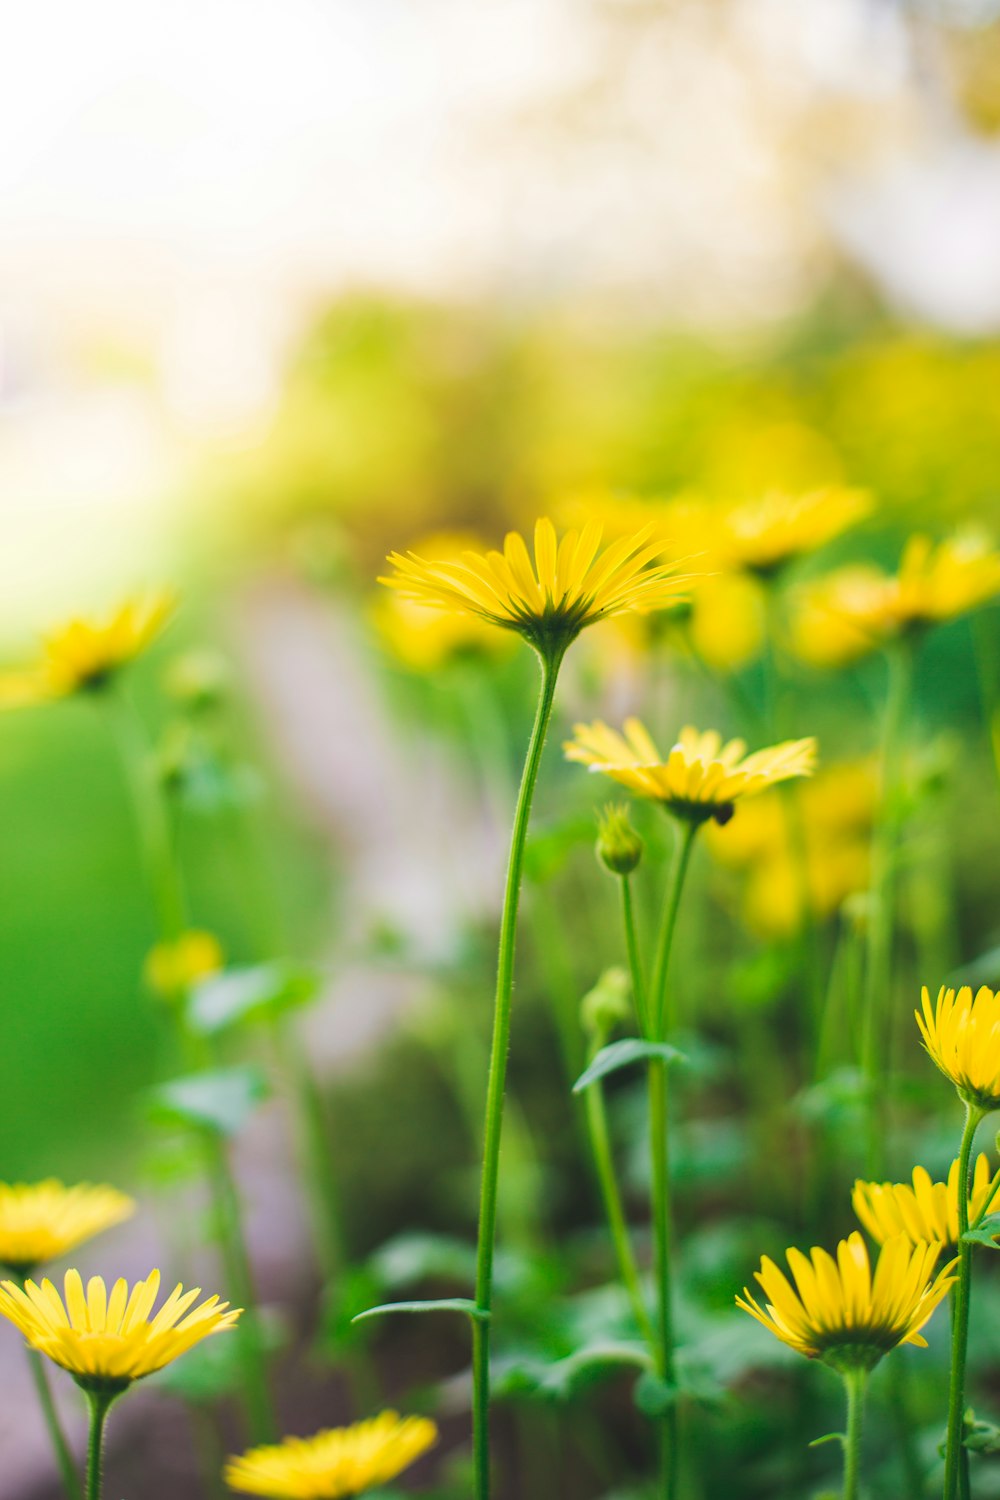 tilt shift photography of yellow daisies